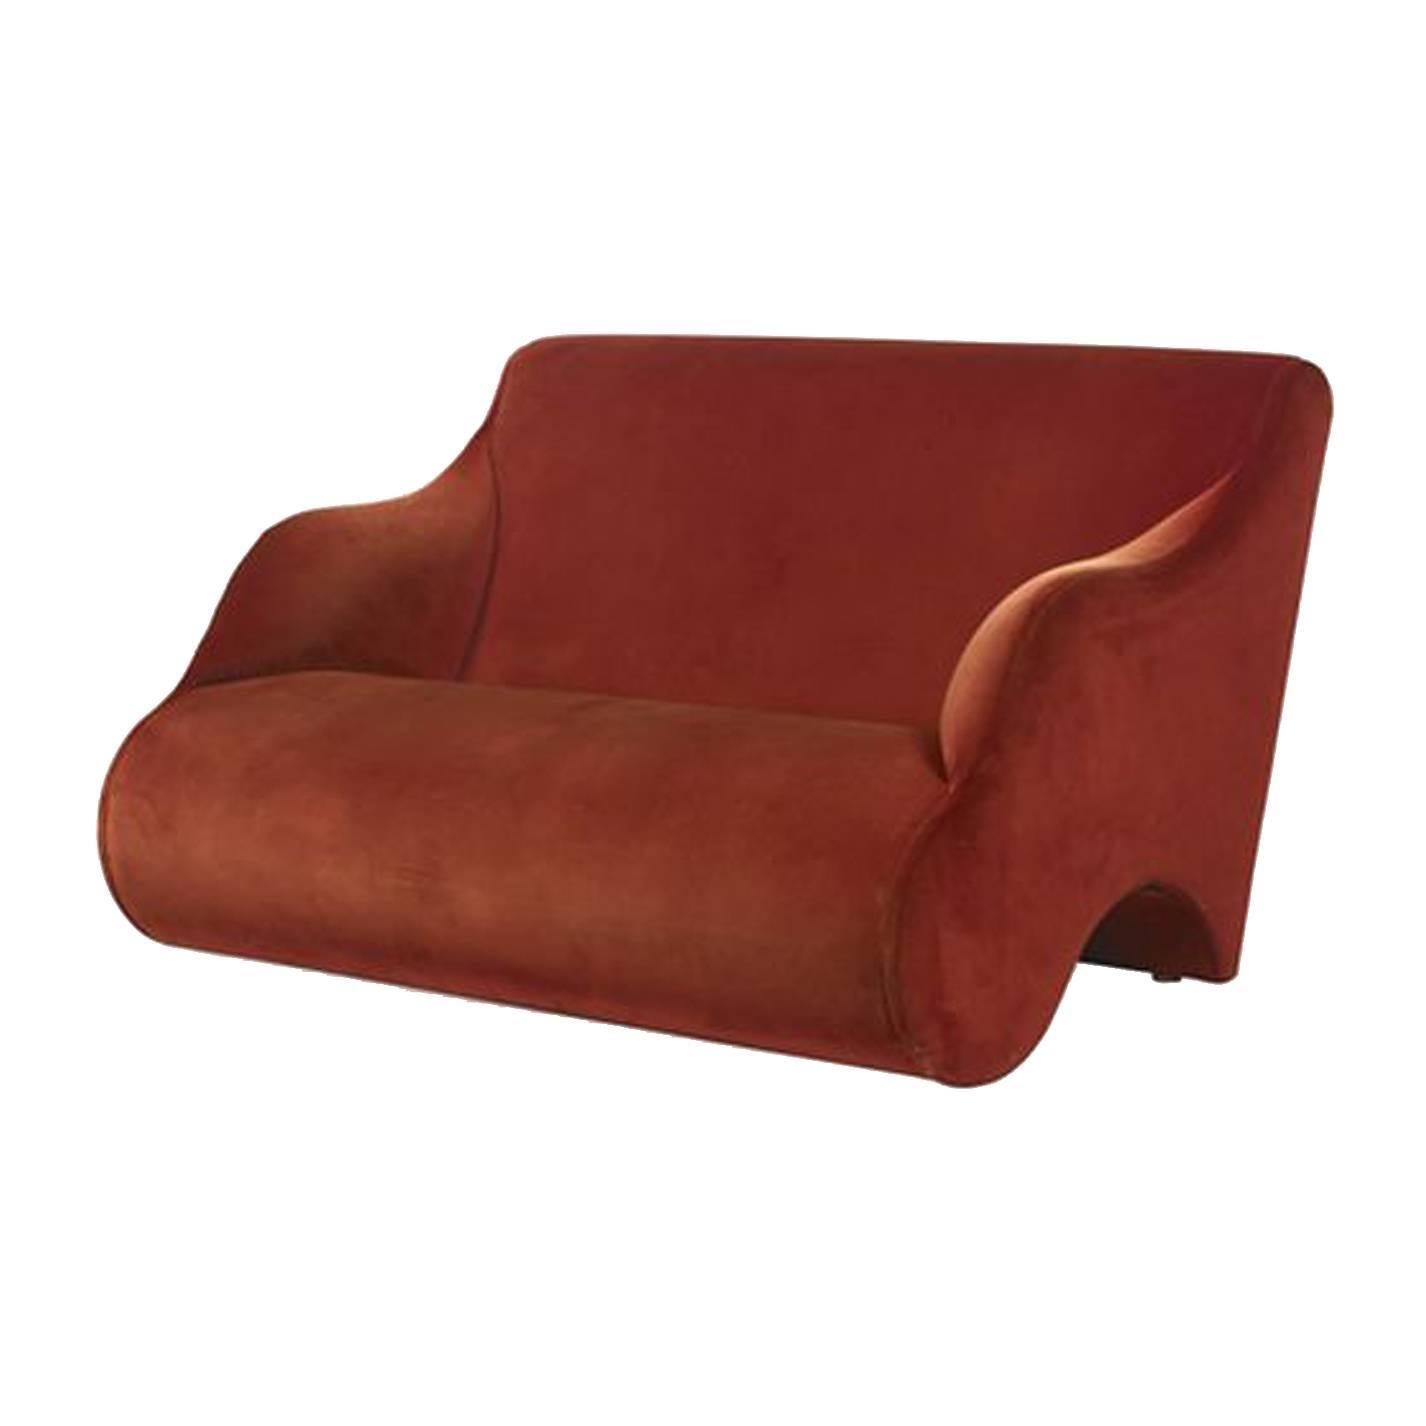 Marie-France Sofa by Martin Szekely. In stock